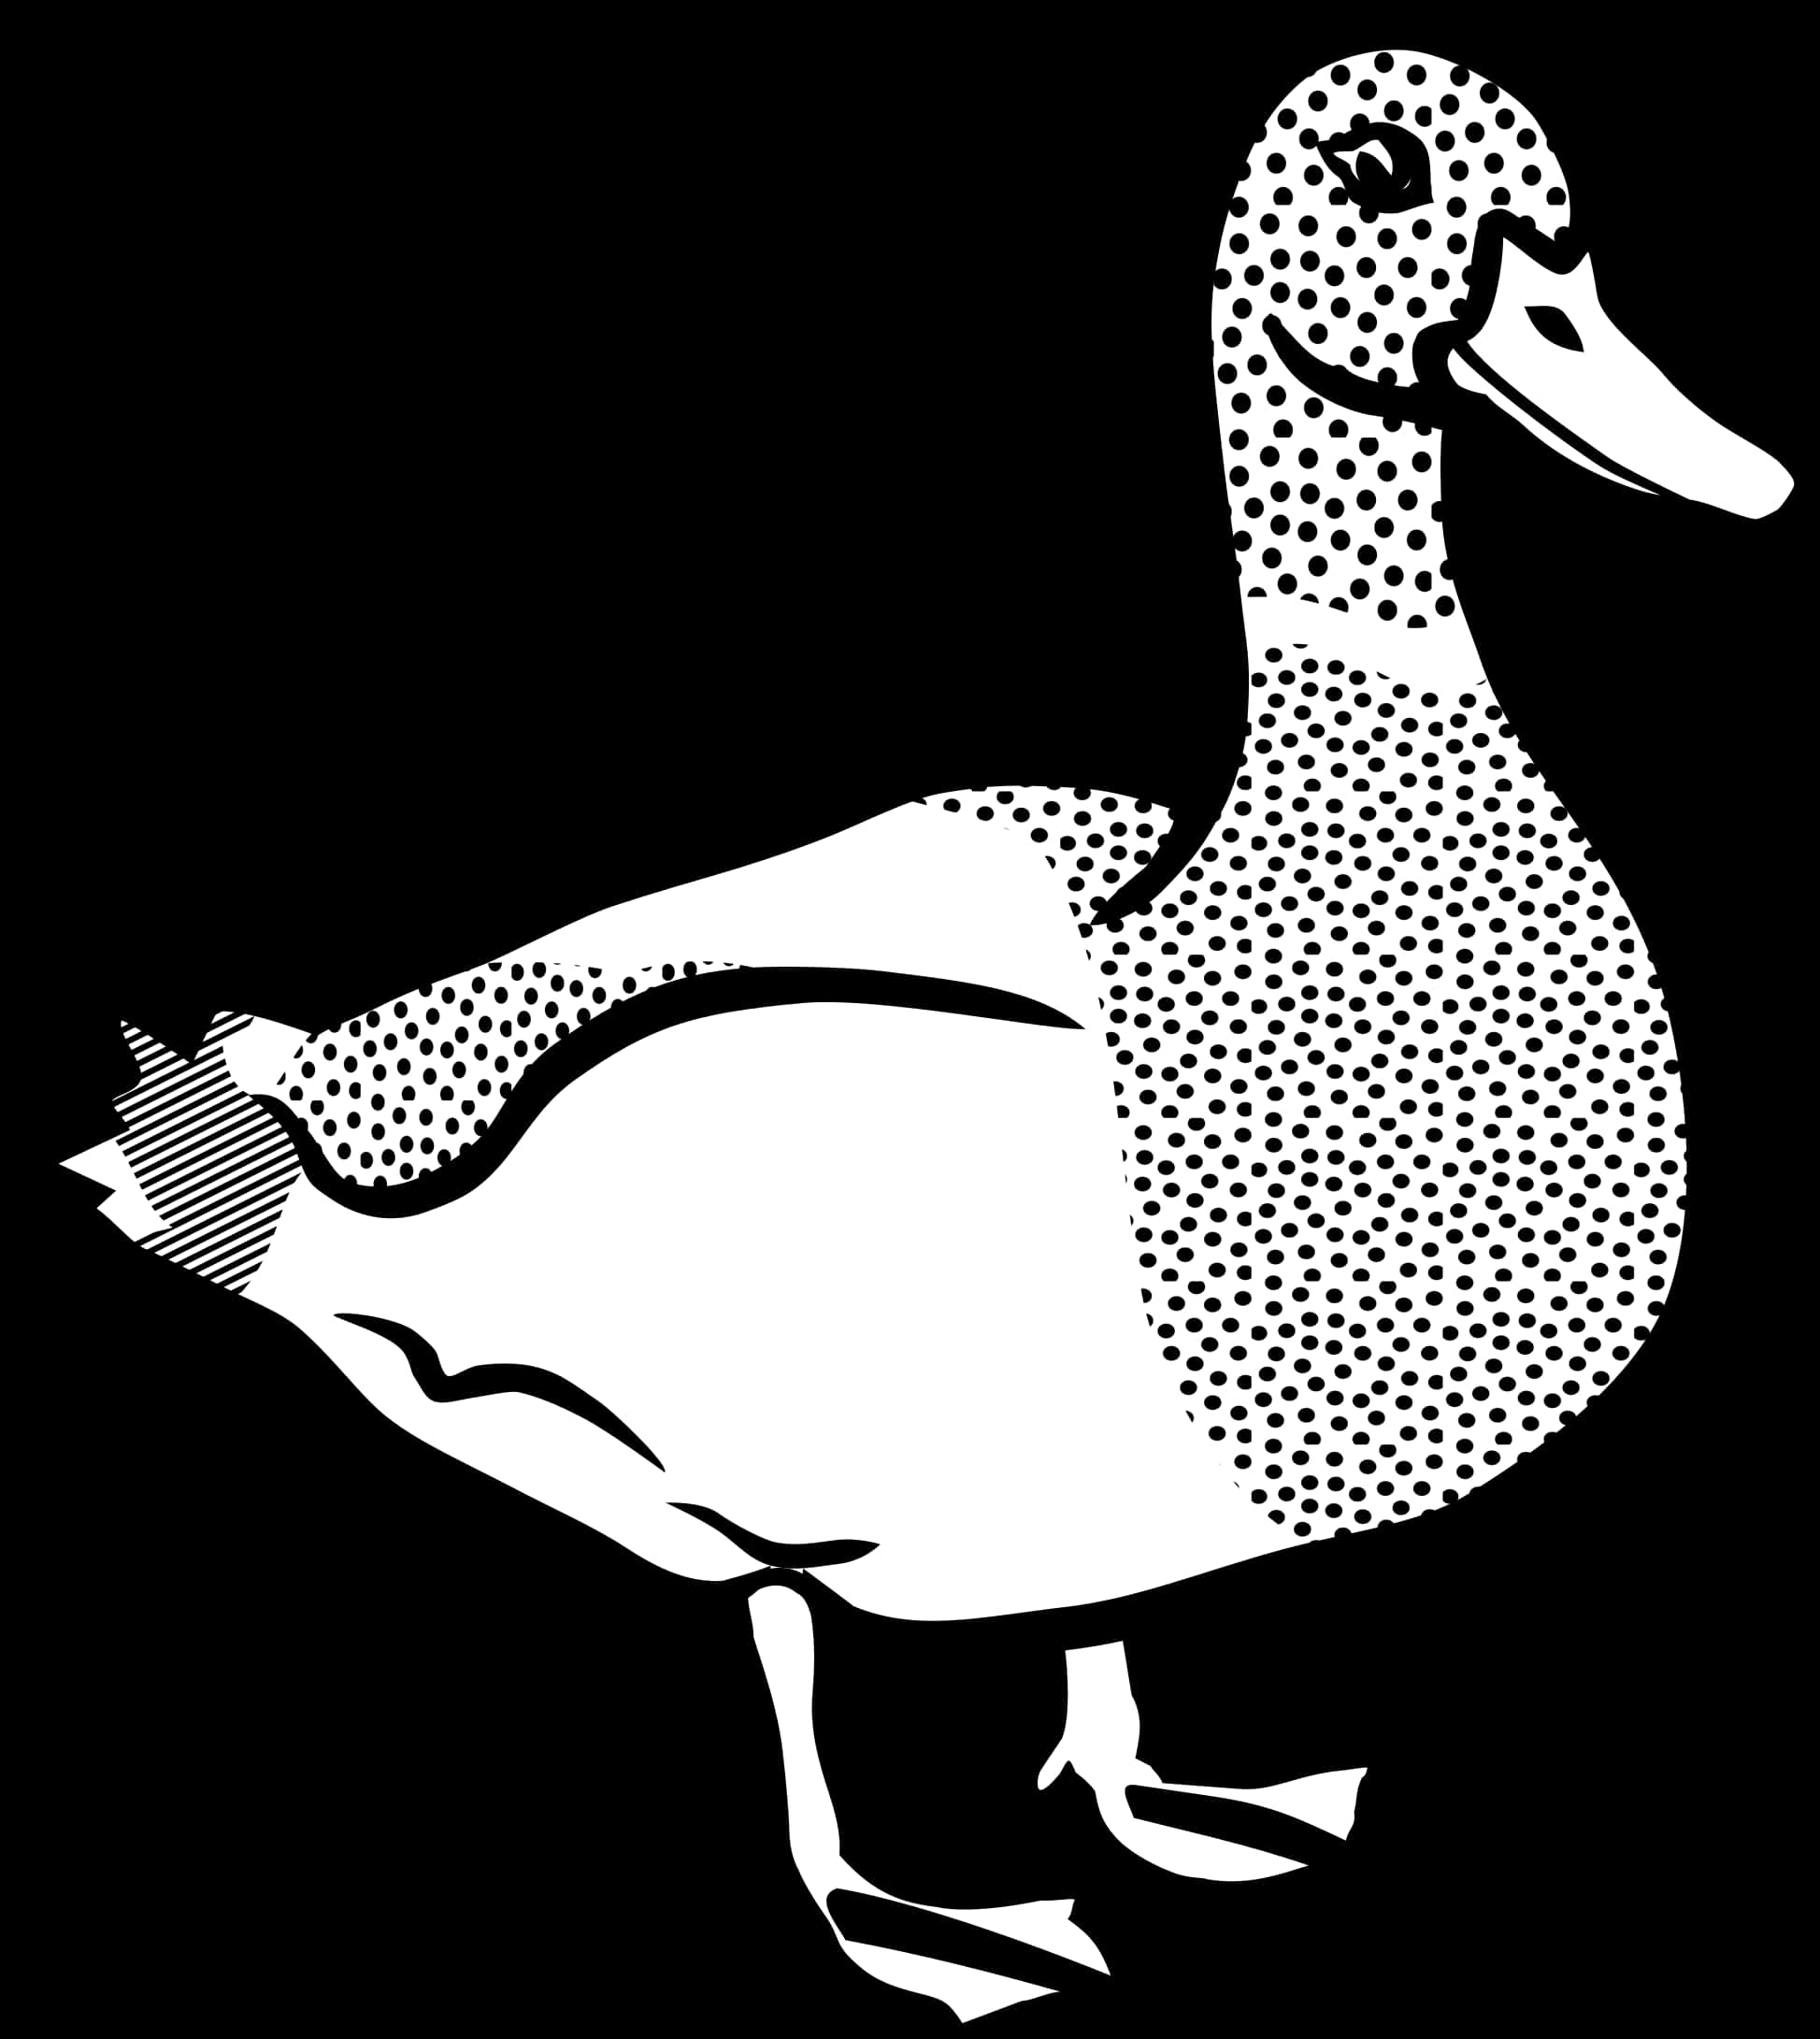 Stylized Blackand White Duck Illustration PNG